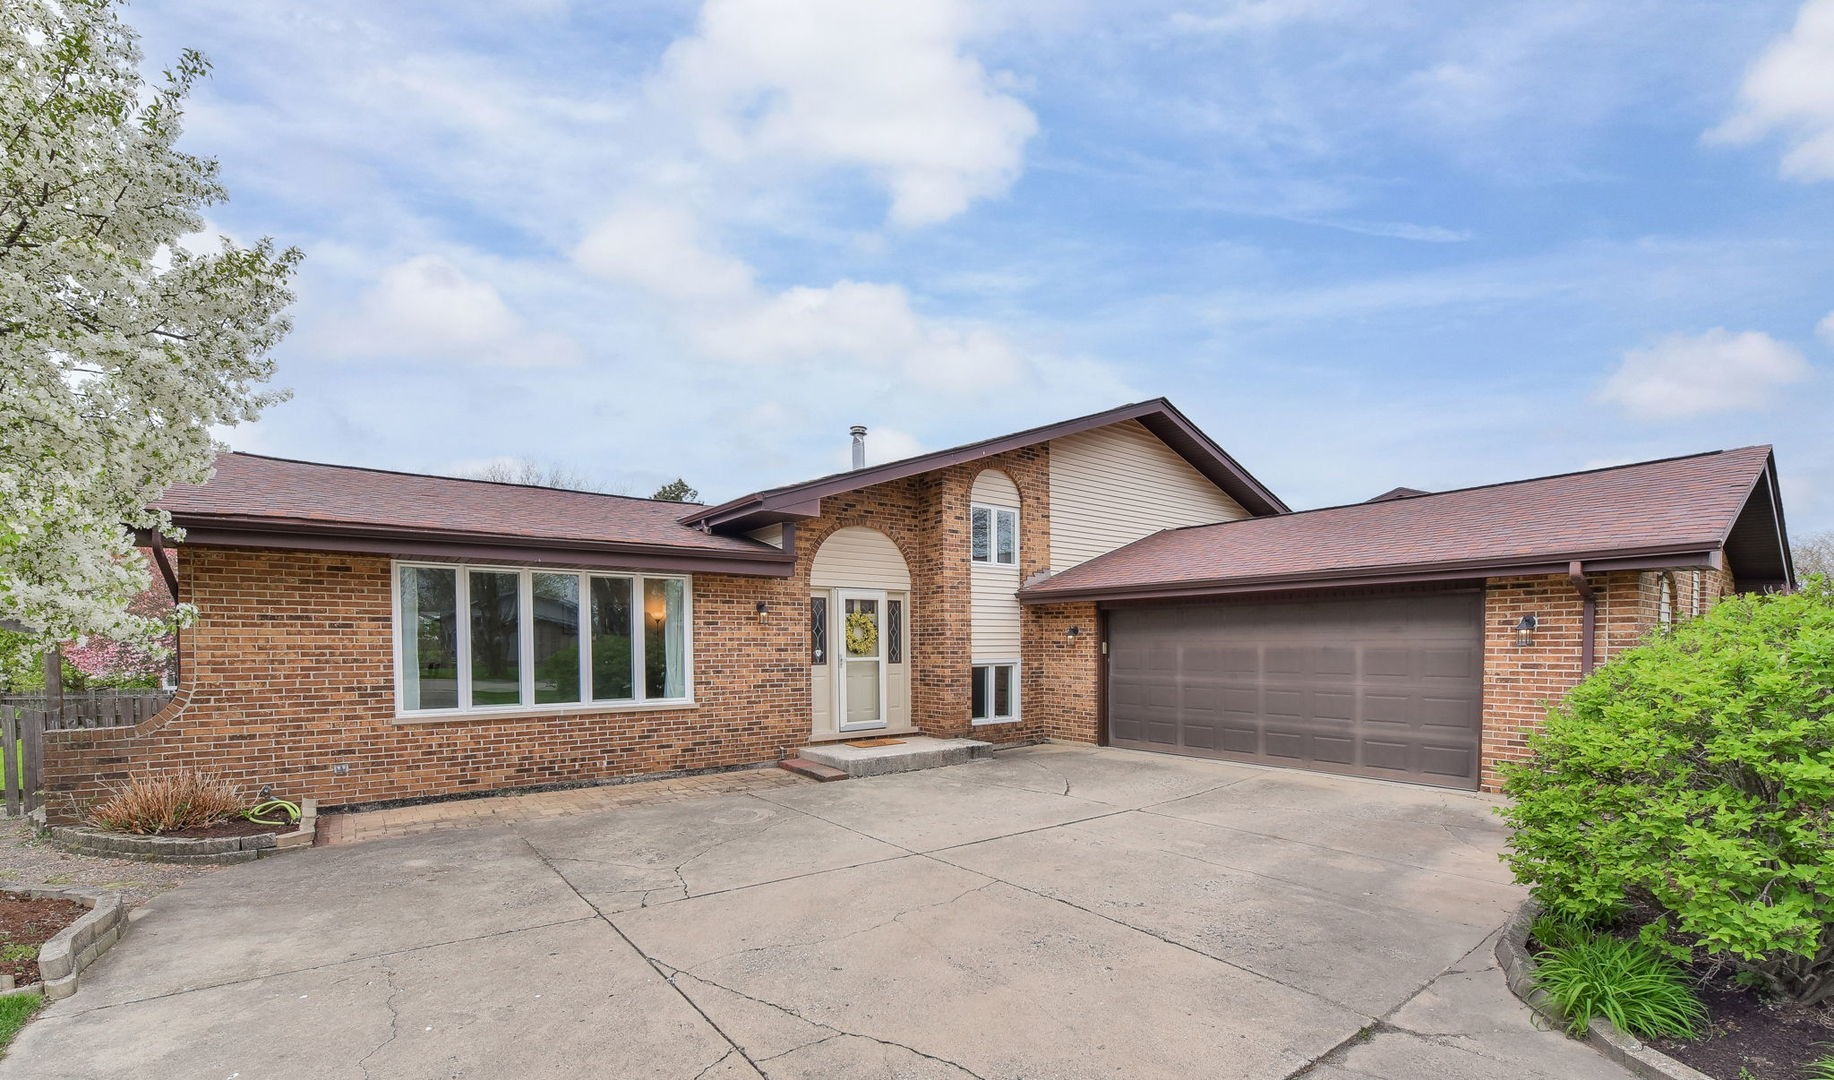 3. 14520 S Canvasback Court